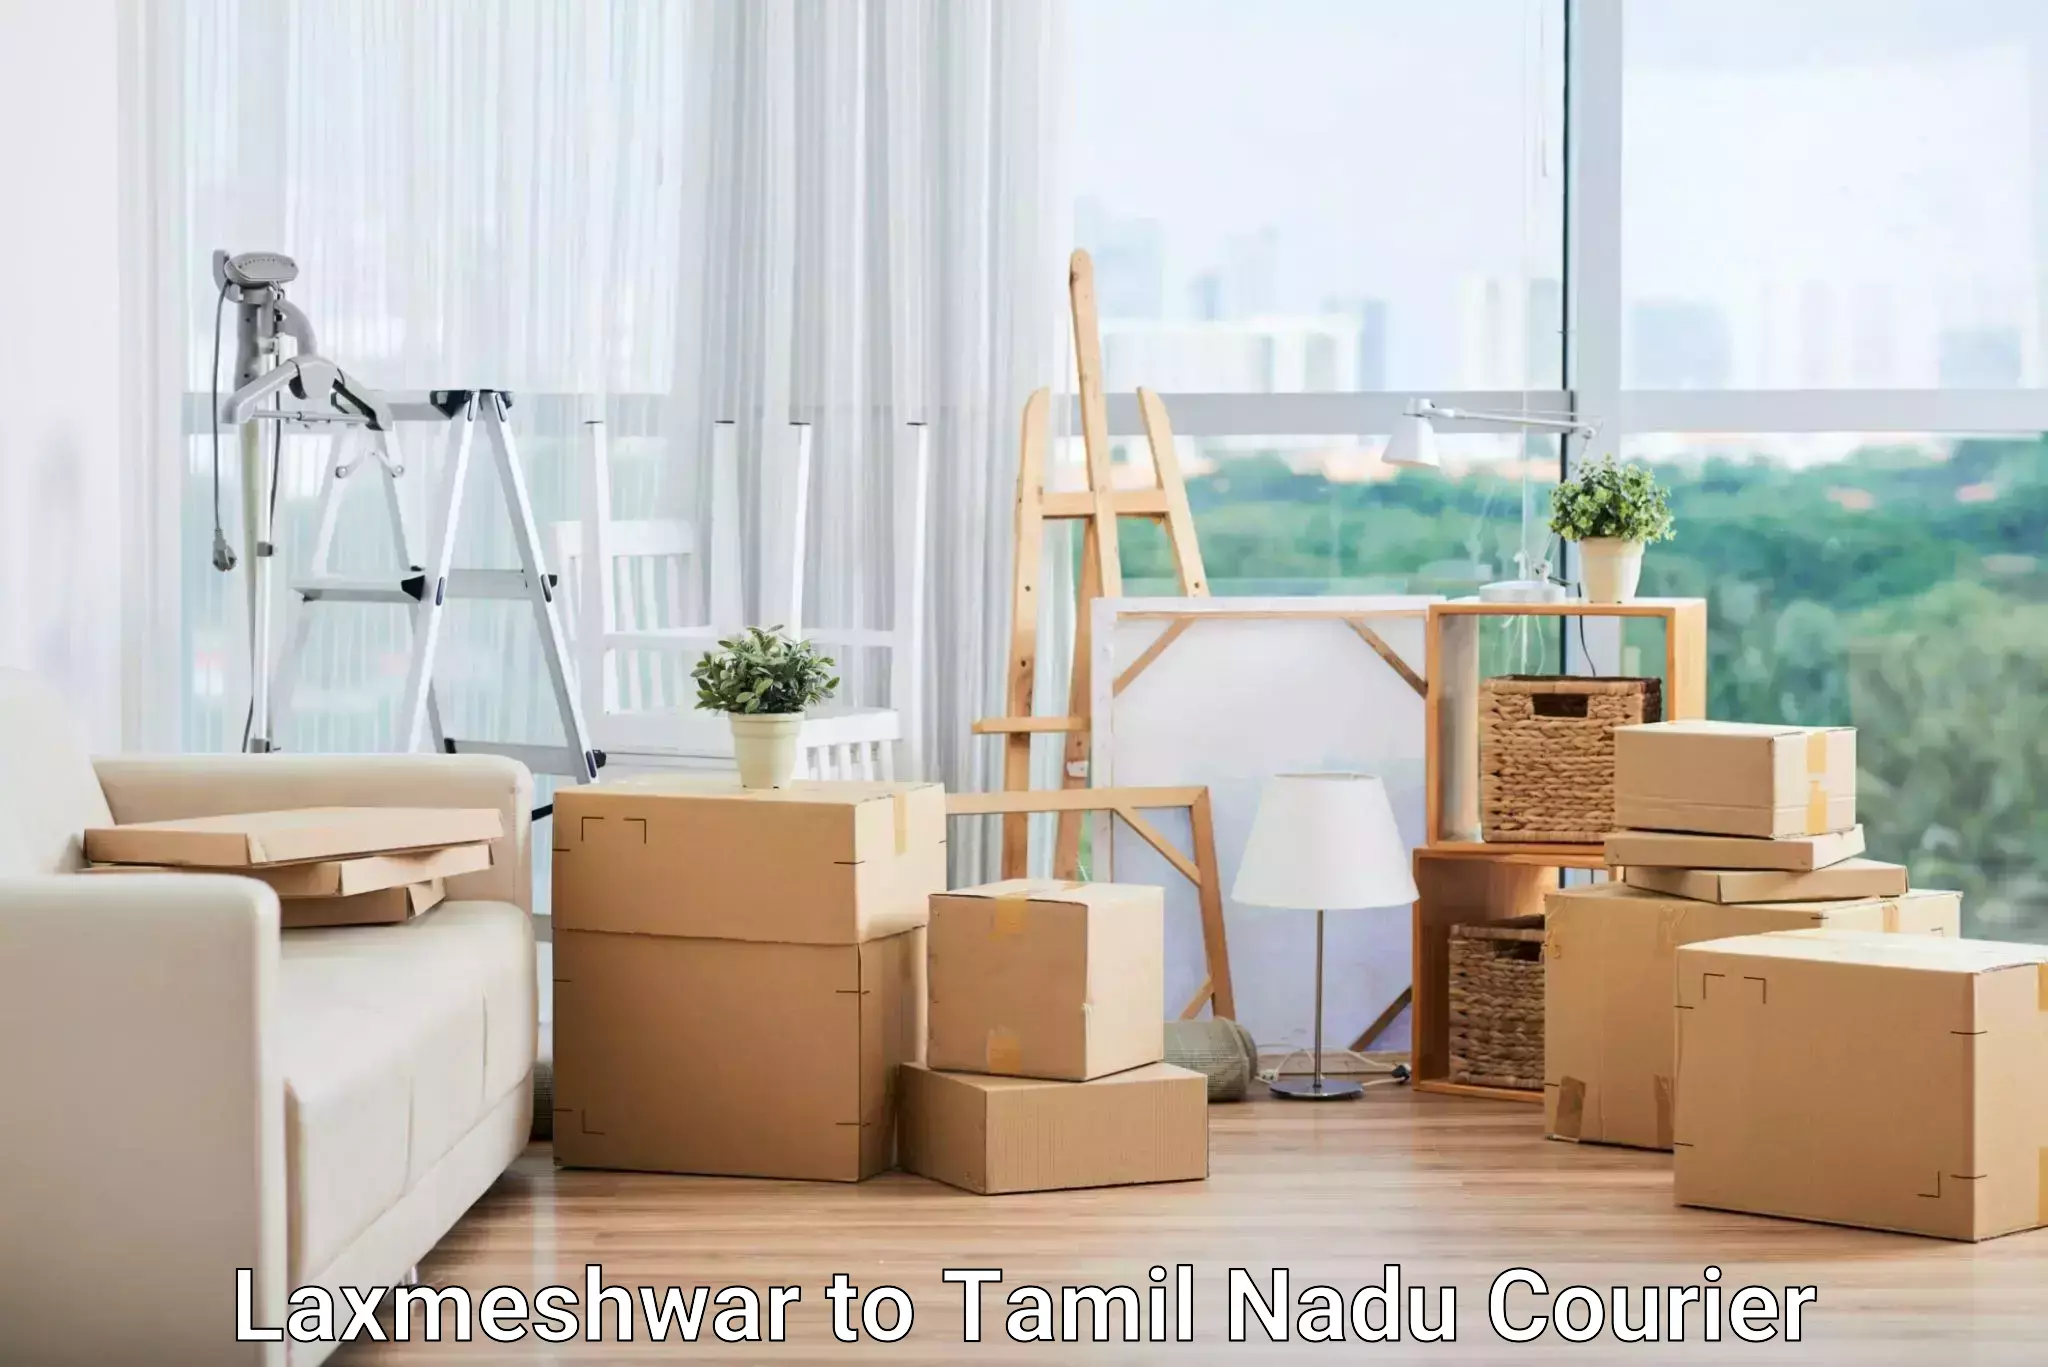 Full-service courier options Laxmeshwar to Sri Ramachandra Institute of Higher Education and Research Chennai